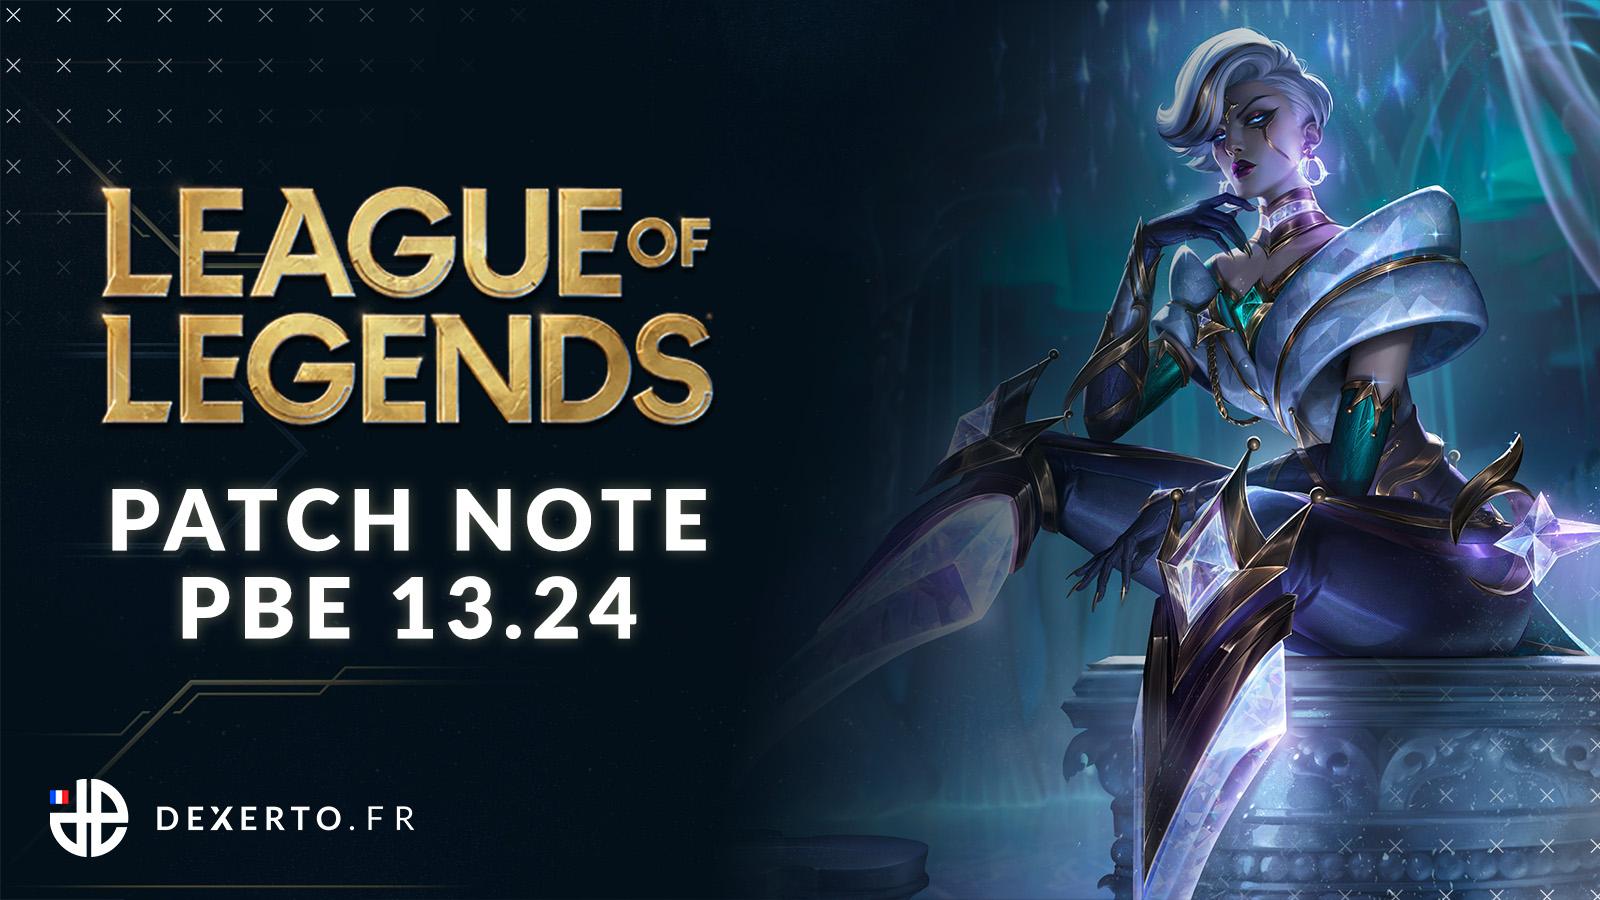 NERFPLZ.LOL Official Patch 13.24 Patch Notes Released!, killer skins gragas  